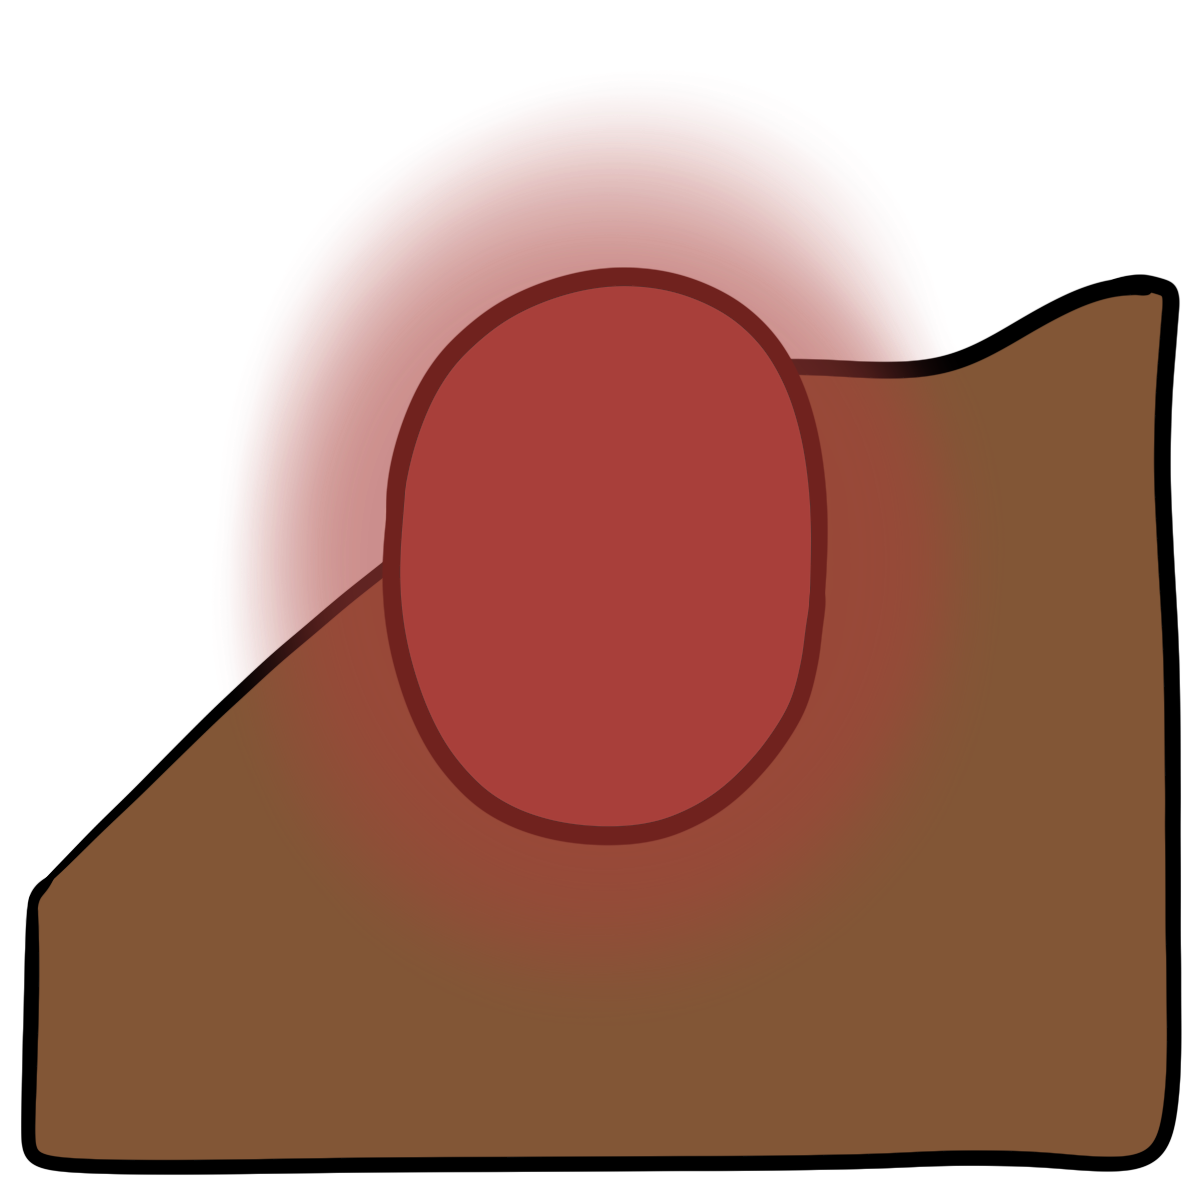 A glowing red oval. Curved medium brown skin fills the bottom half of the background.